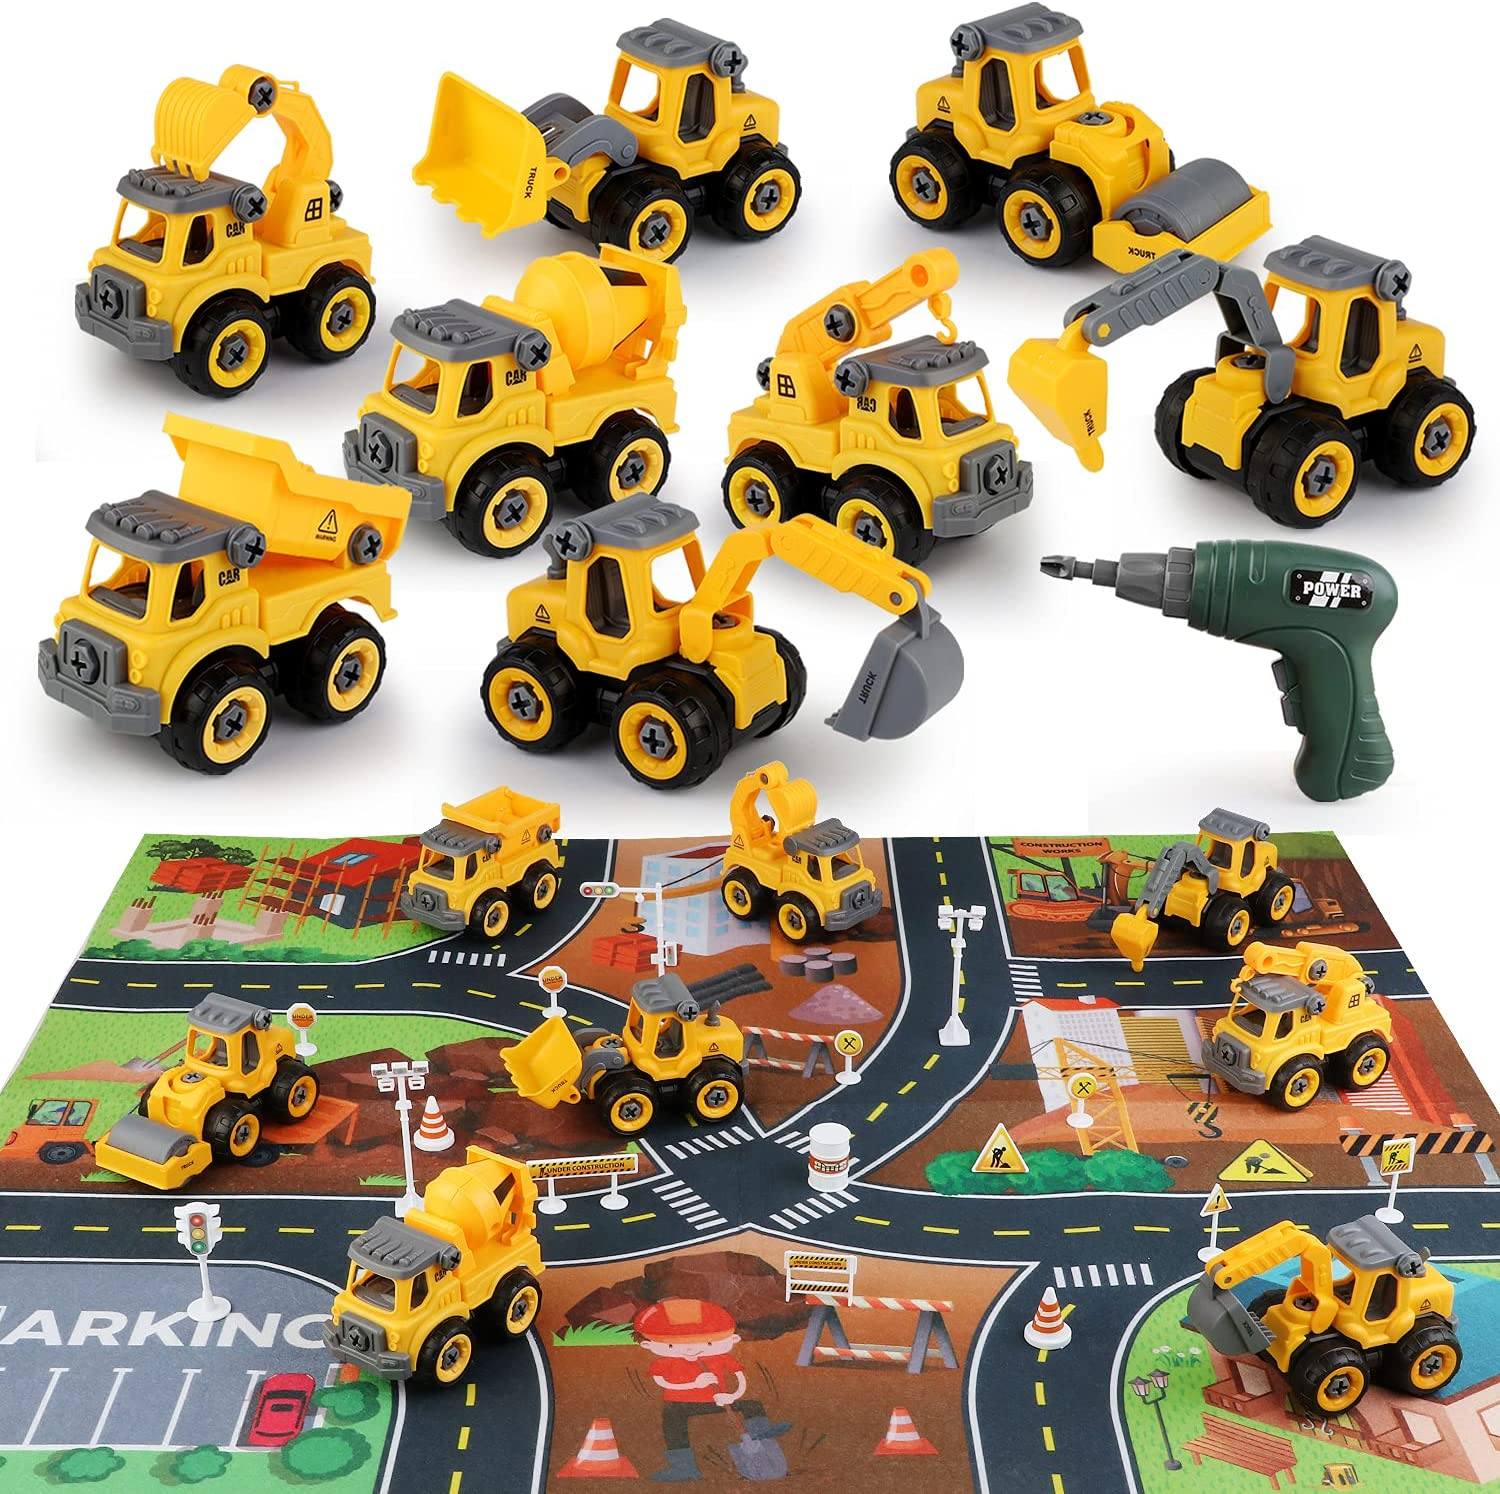 Take Apart Toy STEM 7-in-1 Truck Car Toys Box Build Your Own Construction Set 3 